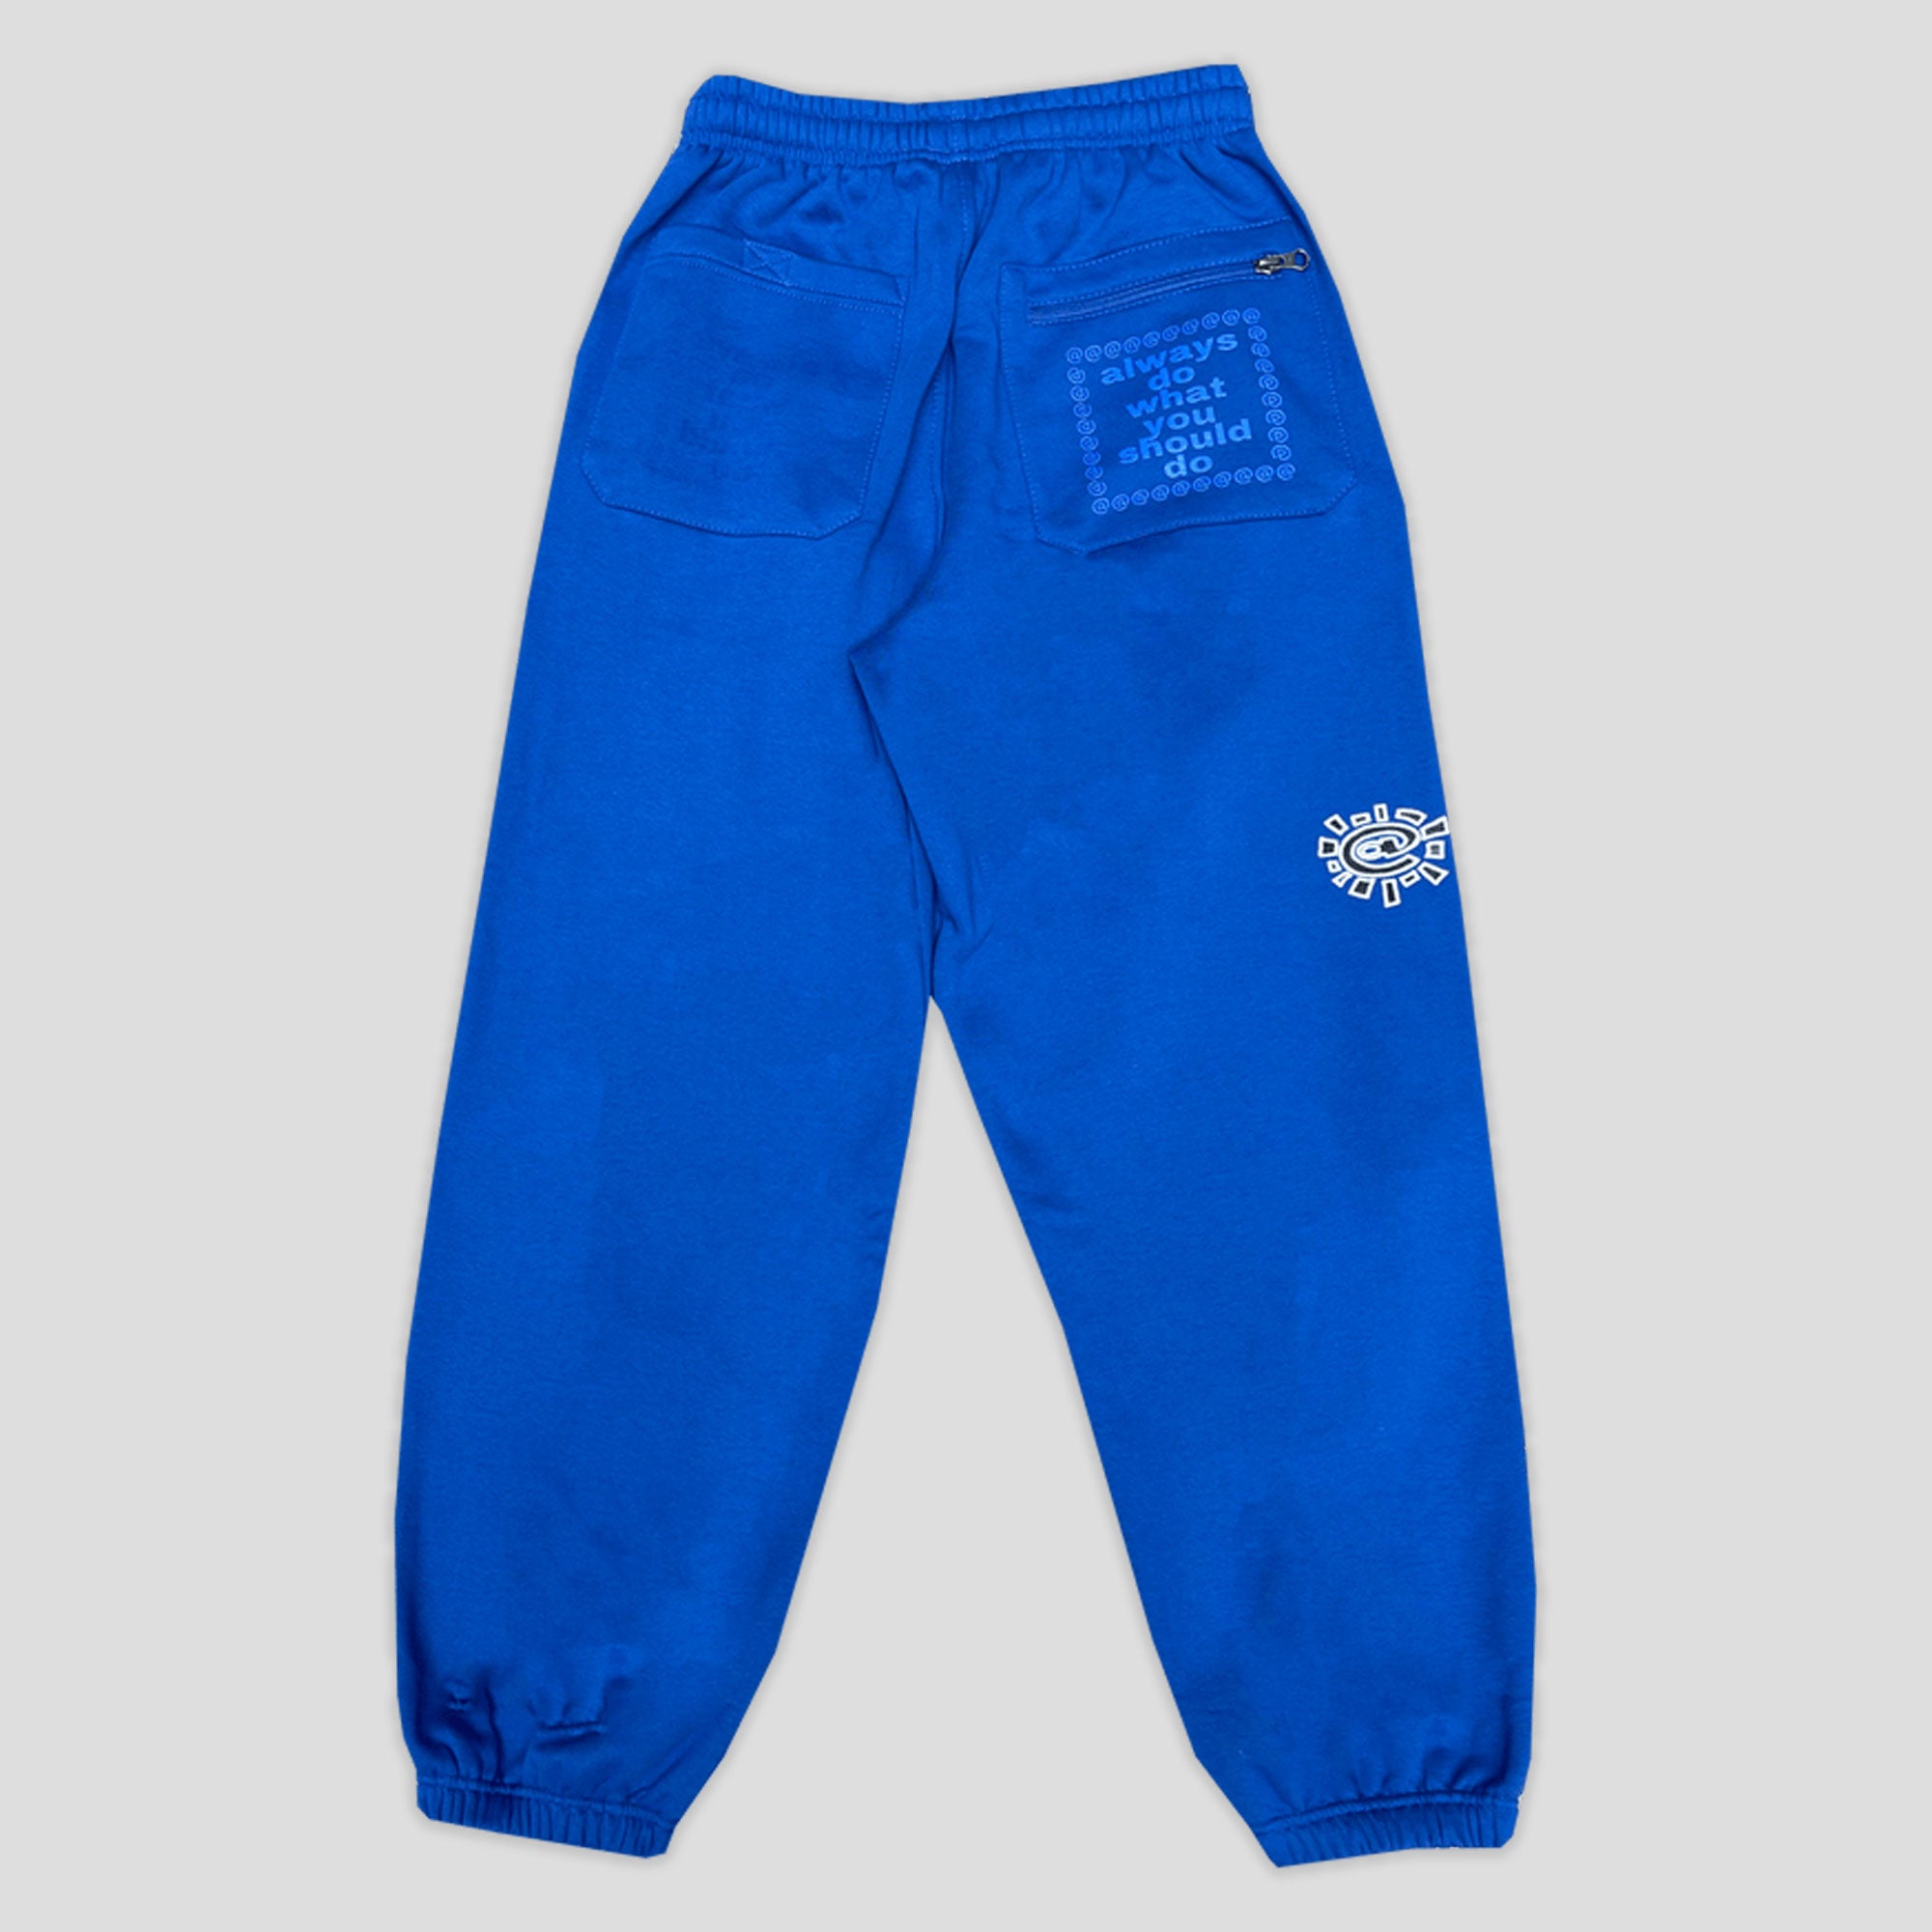 Always Do What You Should Do @Sun Joggers - Royal Blue